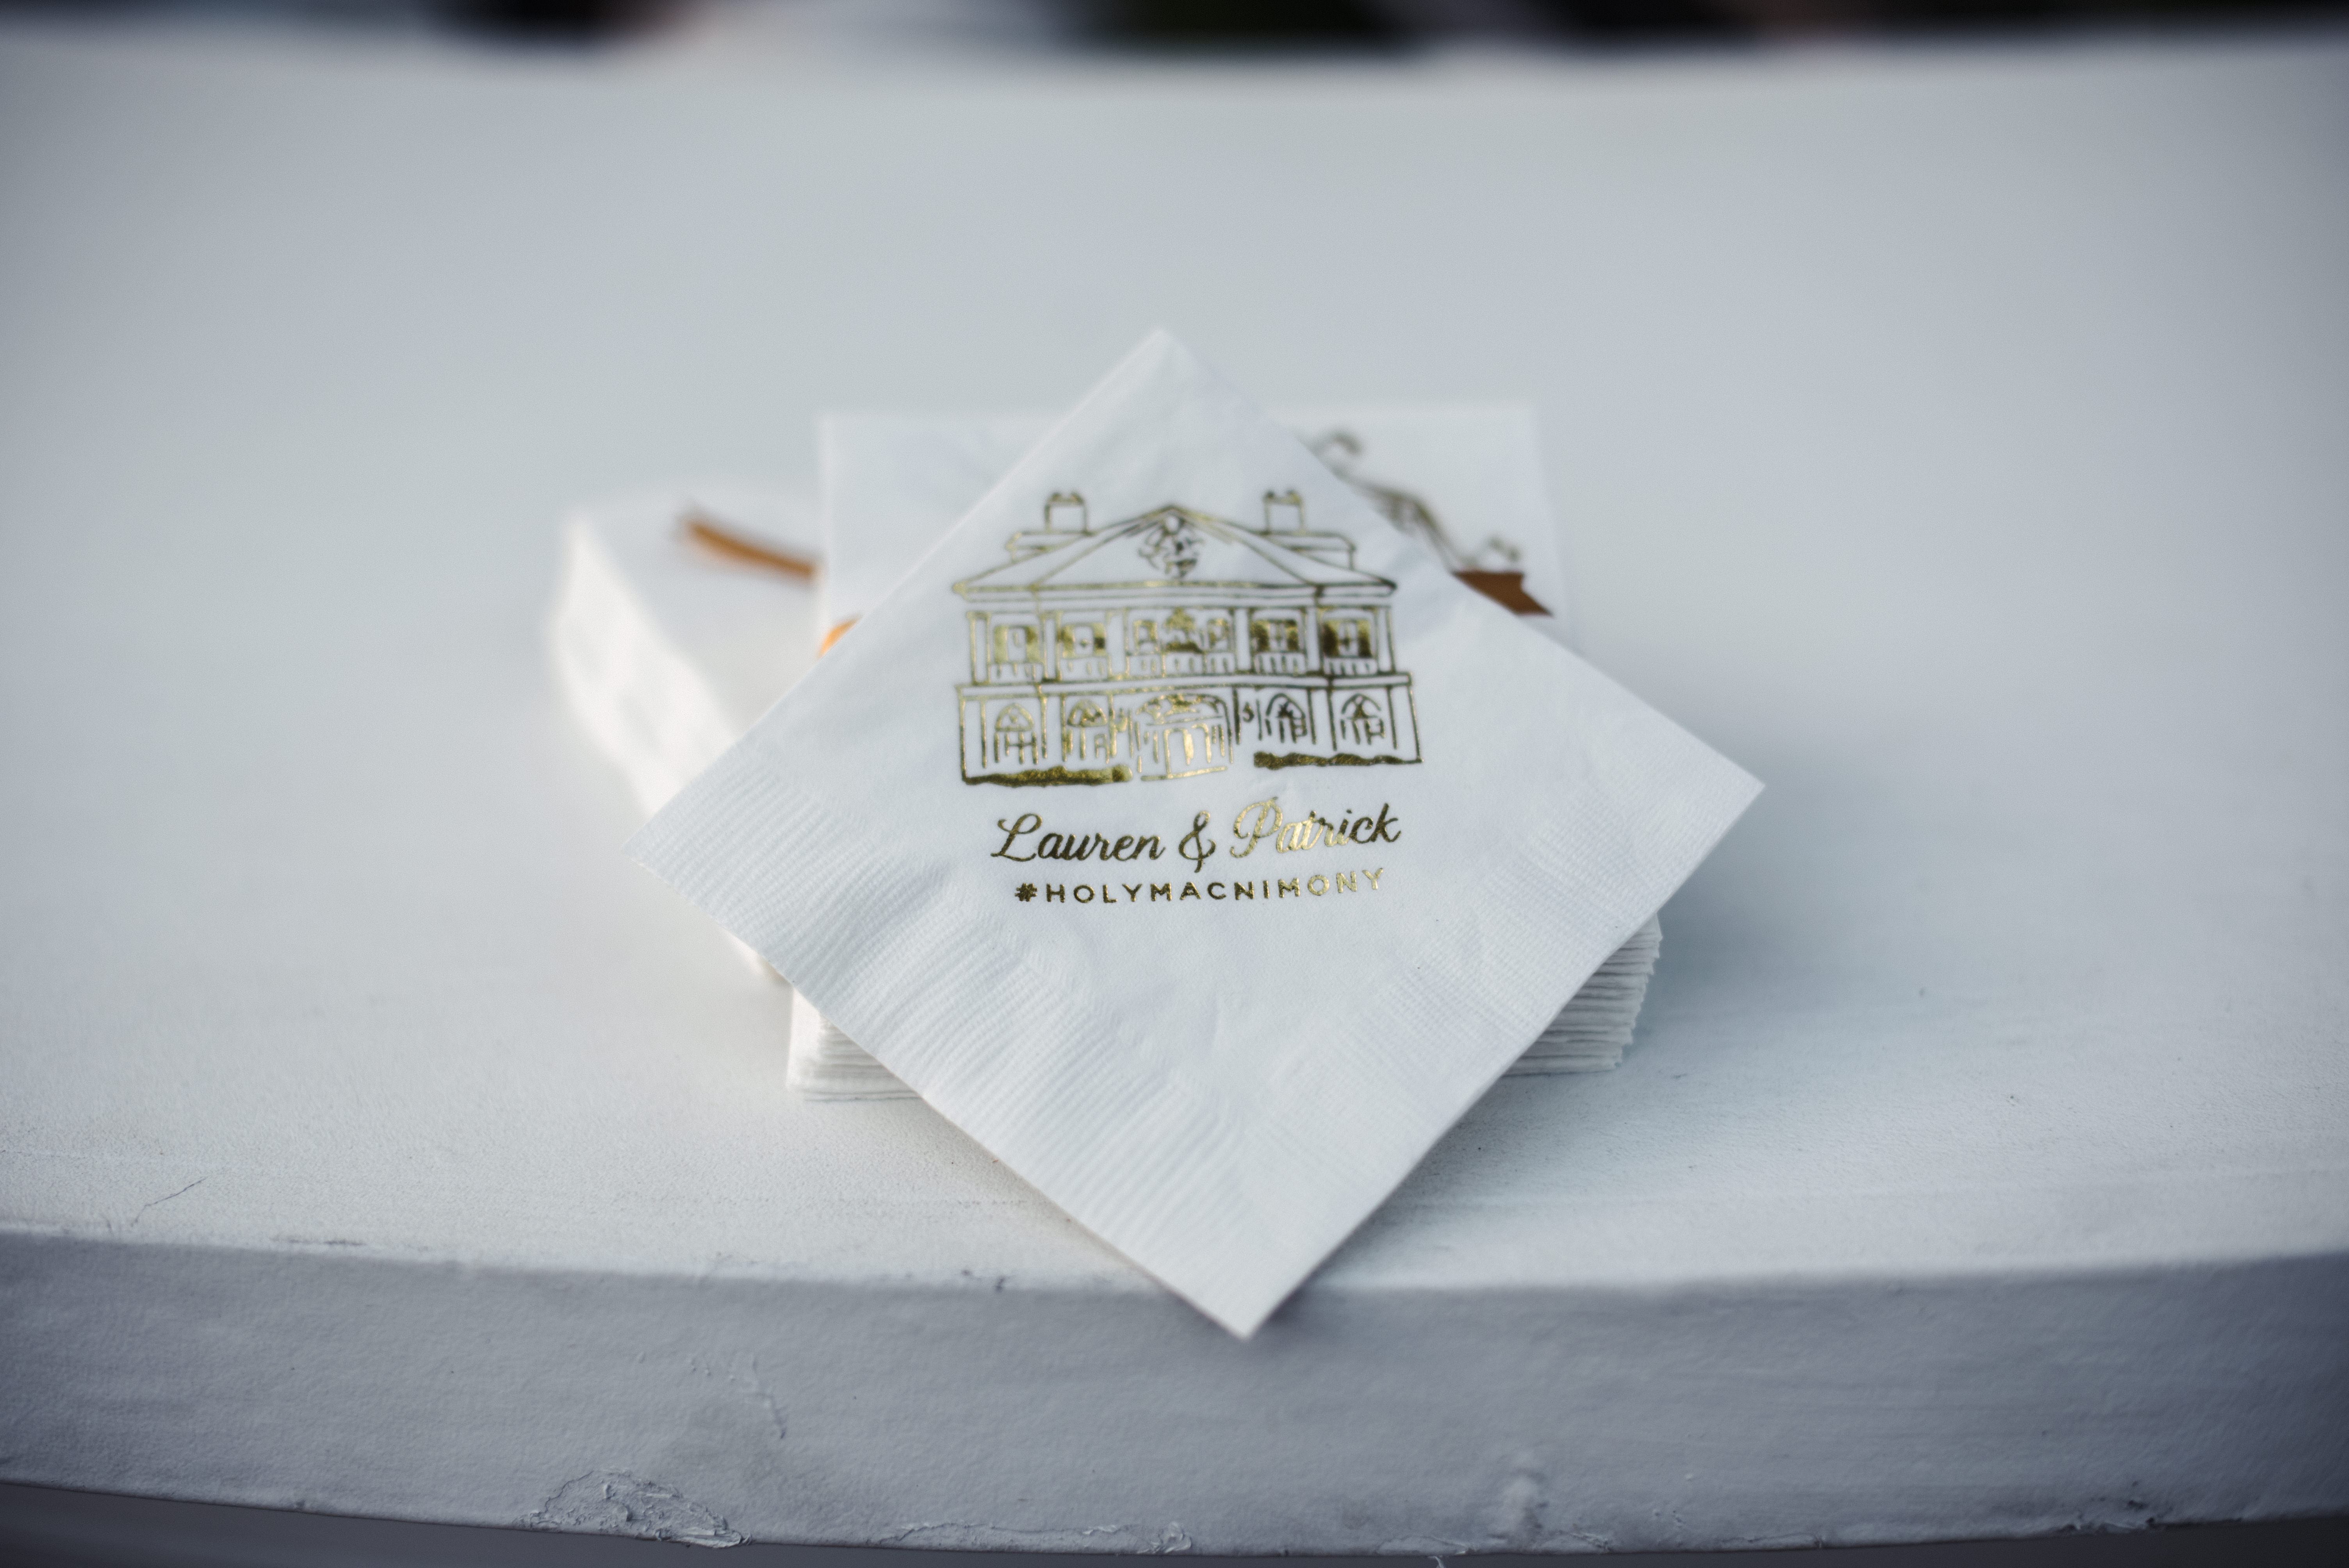 The couple's reception napkins at the Lowndes Grove Plantation Wedding